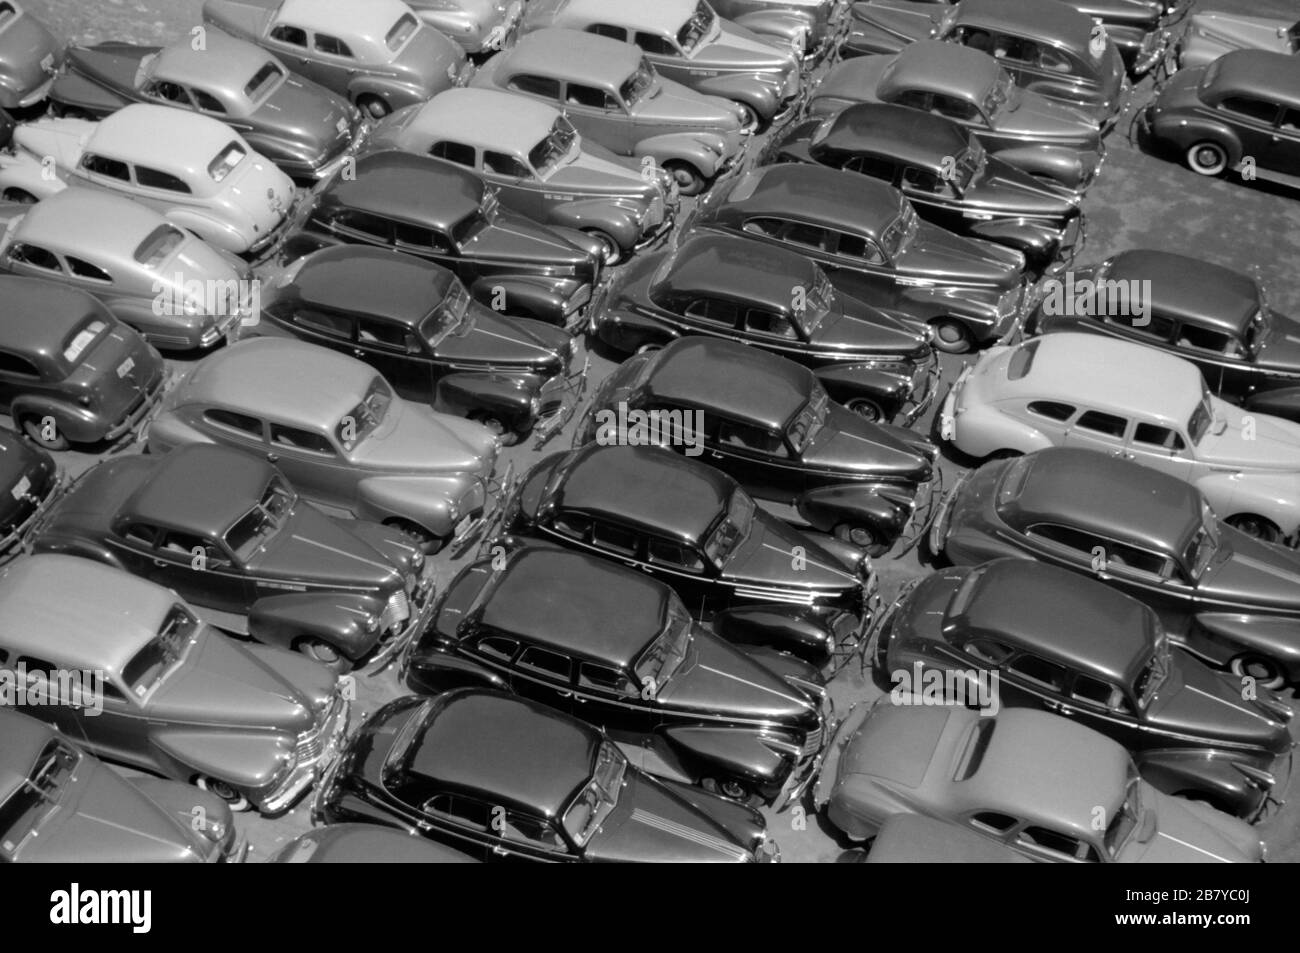 High Angle View of Cars in Parking Lot, Chicago, Illinois, USA, John Vachon for U.S. Farm Security Administration, July 1941 Stock Photo